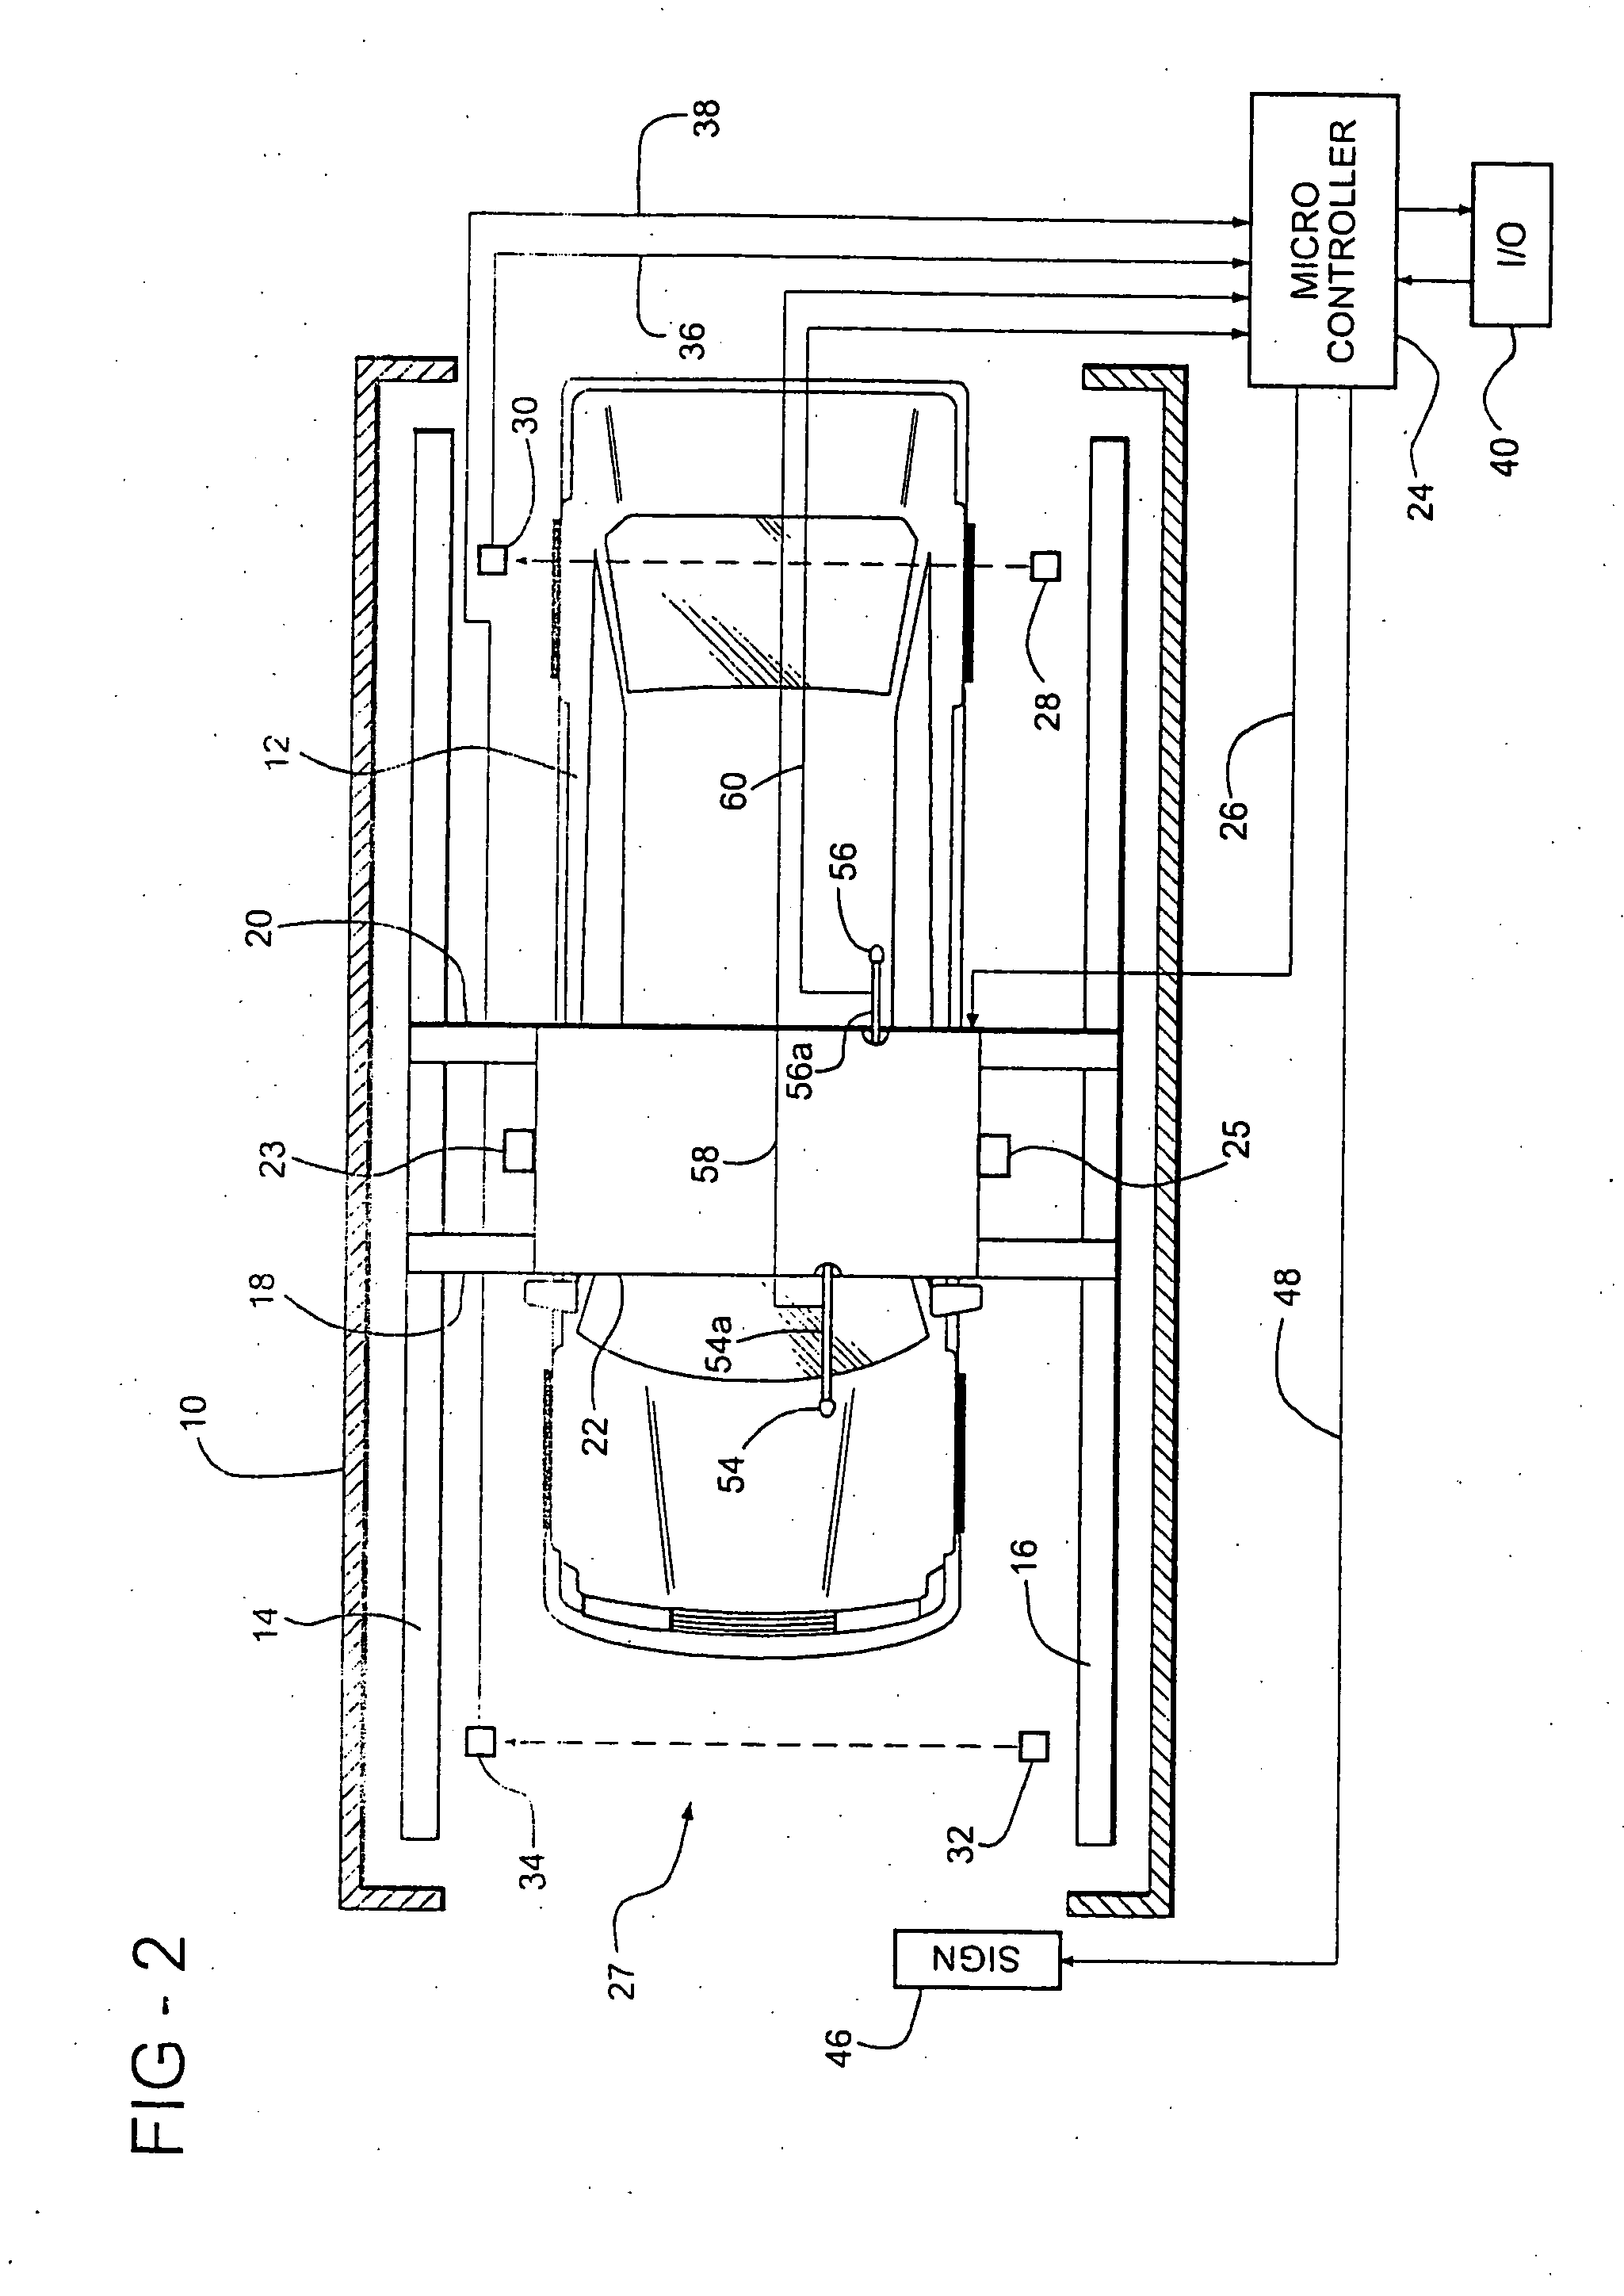 Method and apparatus for washing cars